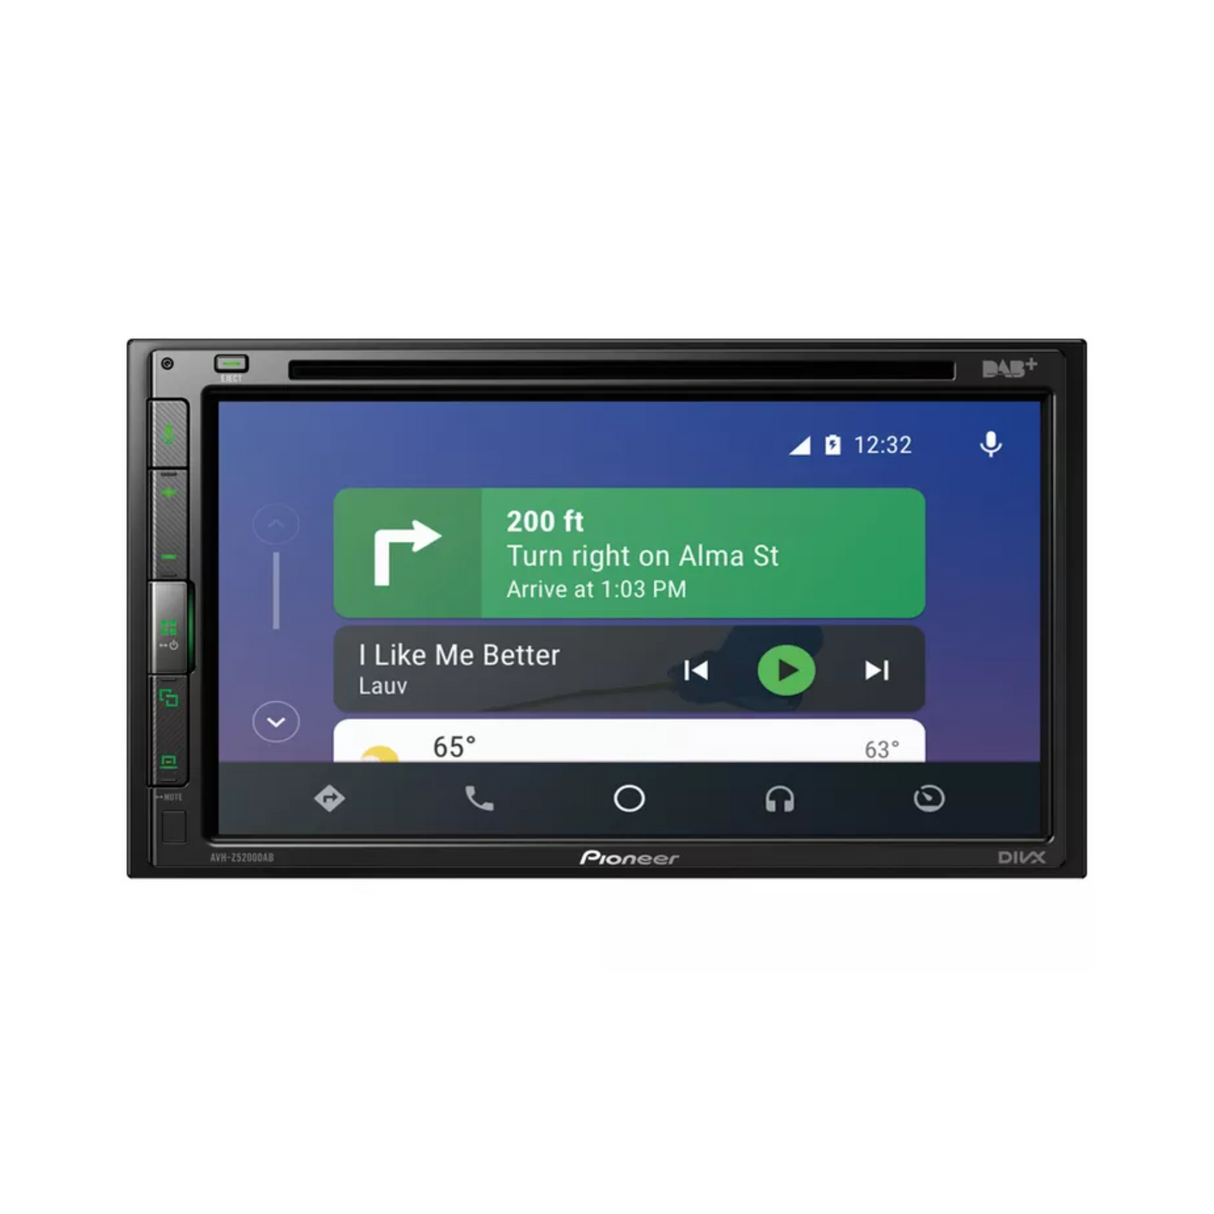 Pioneer AVH-Z5200DAB Car Stereo with Apple CarPlay, Android Auto, DAB & Spotify